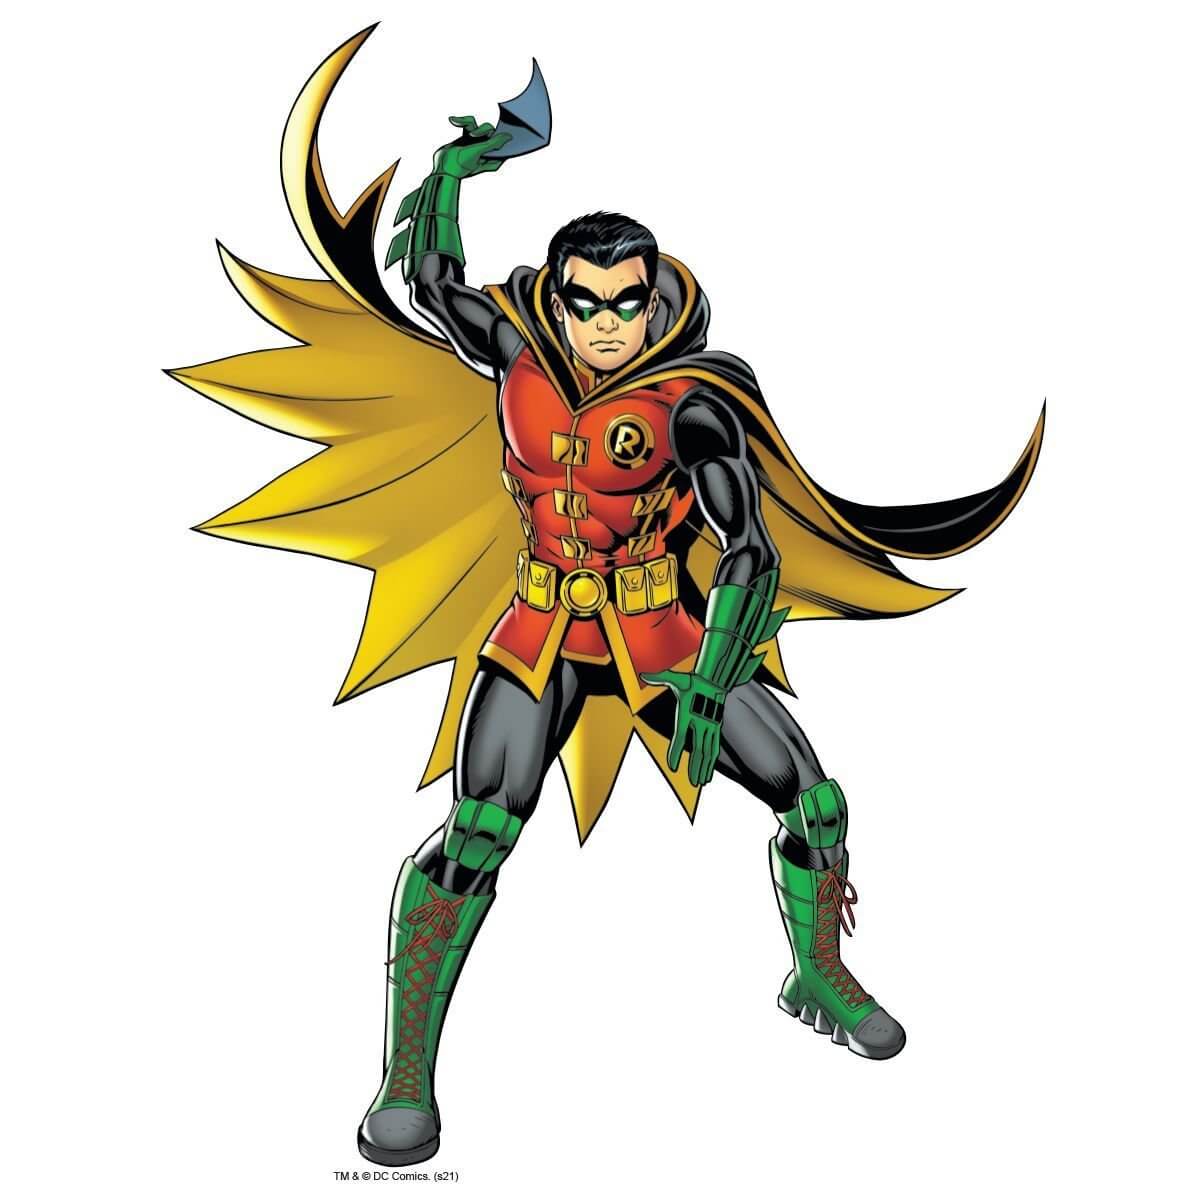 Kismet Decals Robin Primed for Combat Licensed Wall Sticker - Easy DIY Justice League Home & Room Decor Wall Art - Kismet Decals